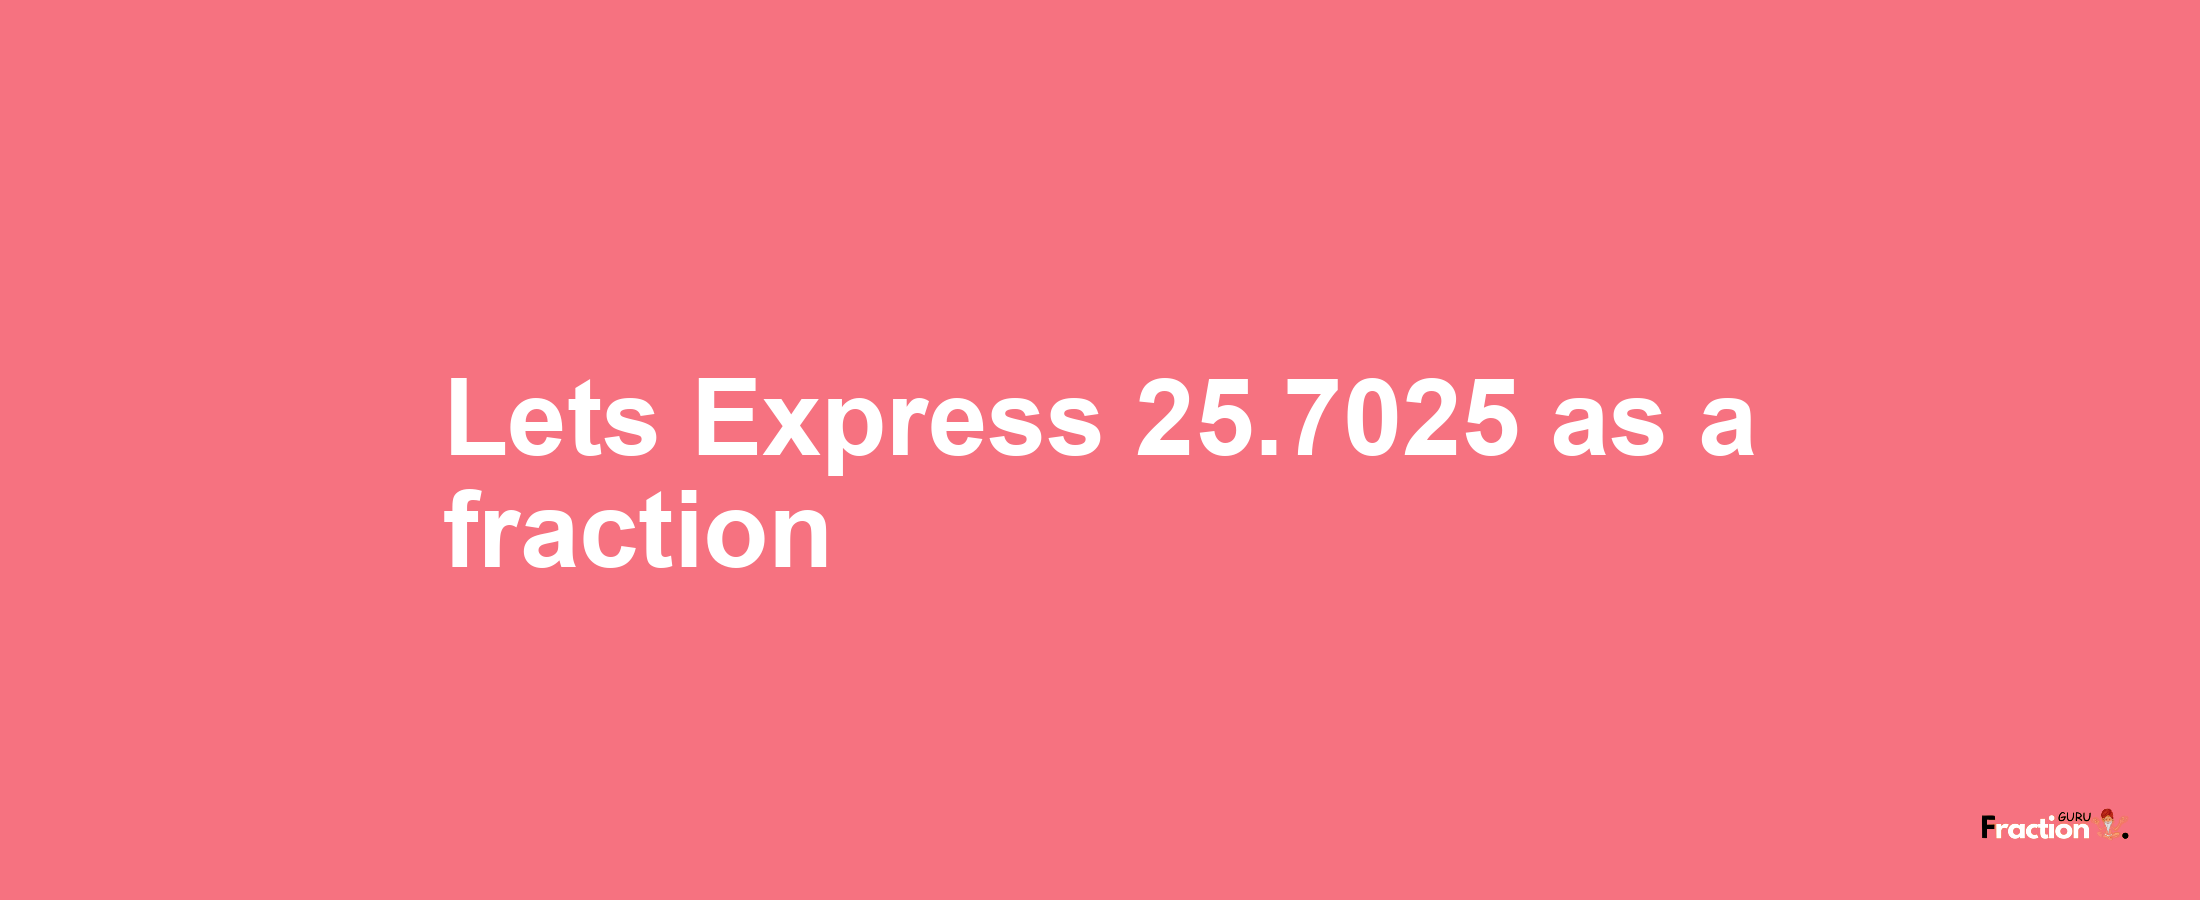 Lets Express 25.7025 as afraction